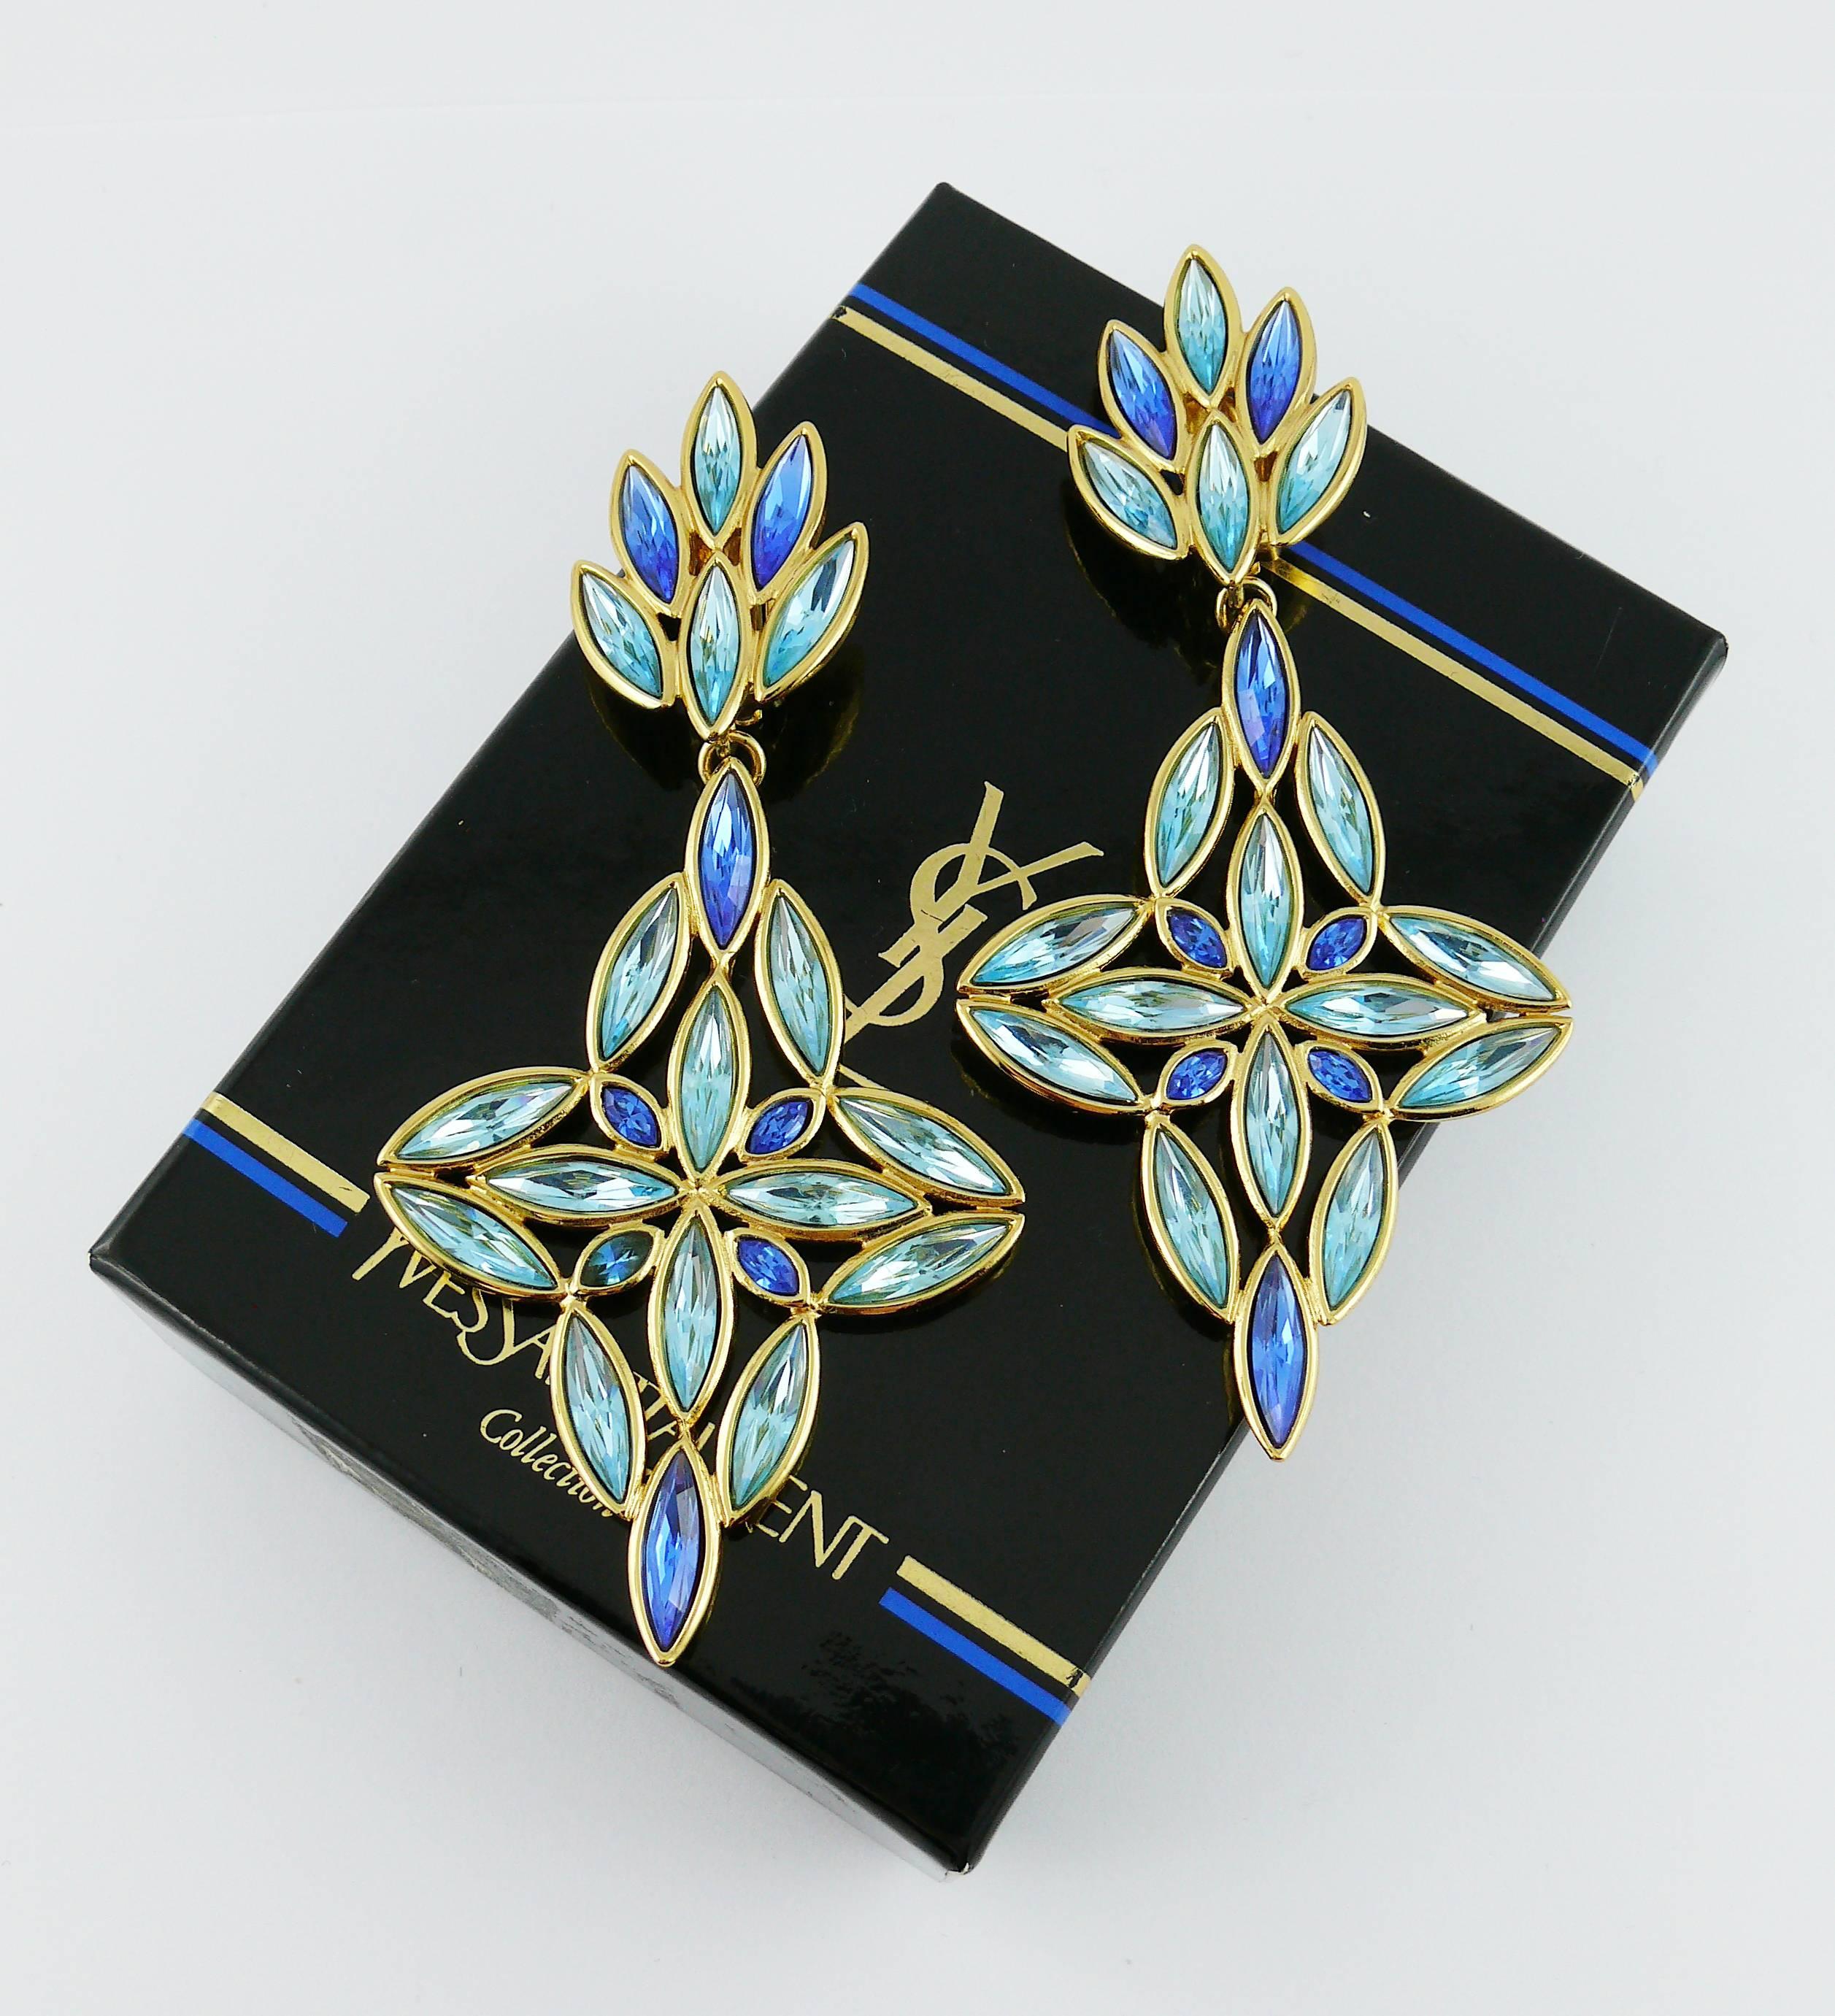 Yves Saint Laurent YSL Vintage Massive Jewelled Dangling Earrings In Excellent Condition For Sale In Nice, FR